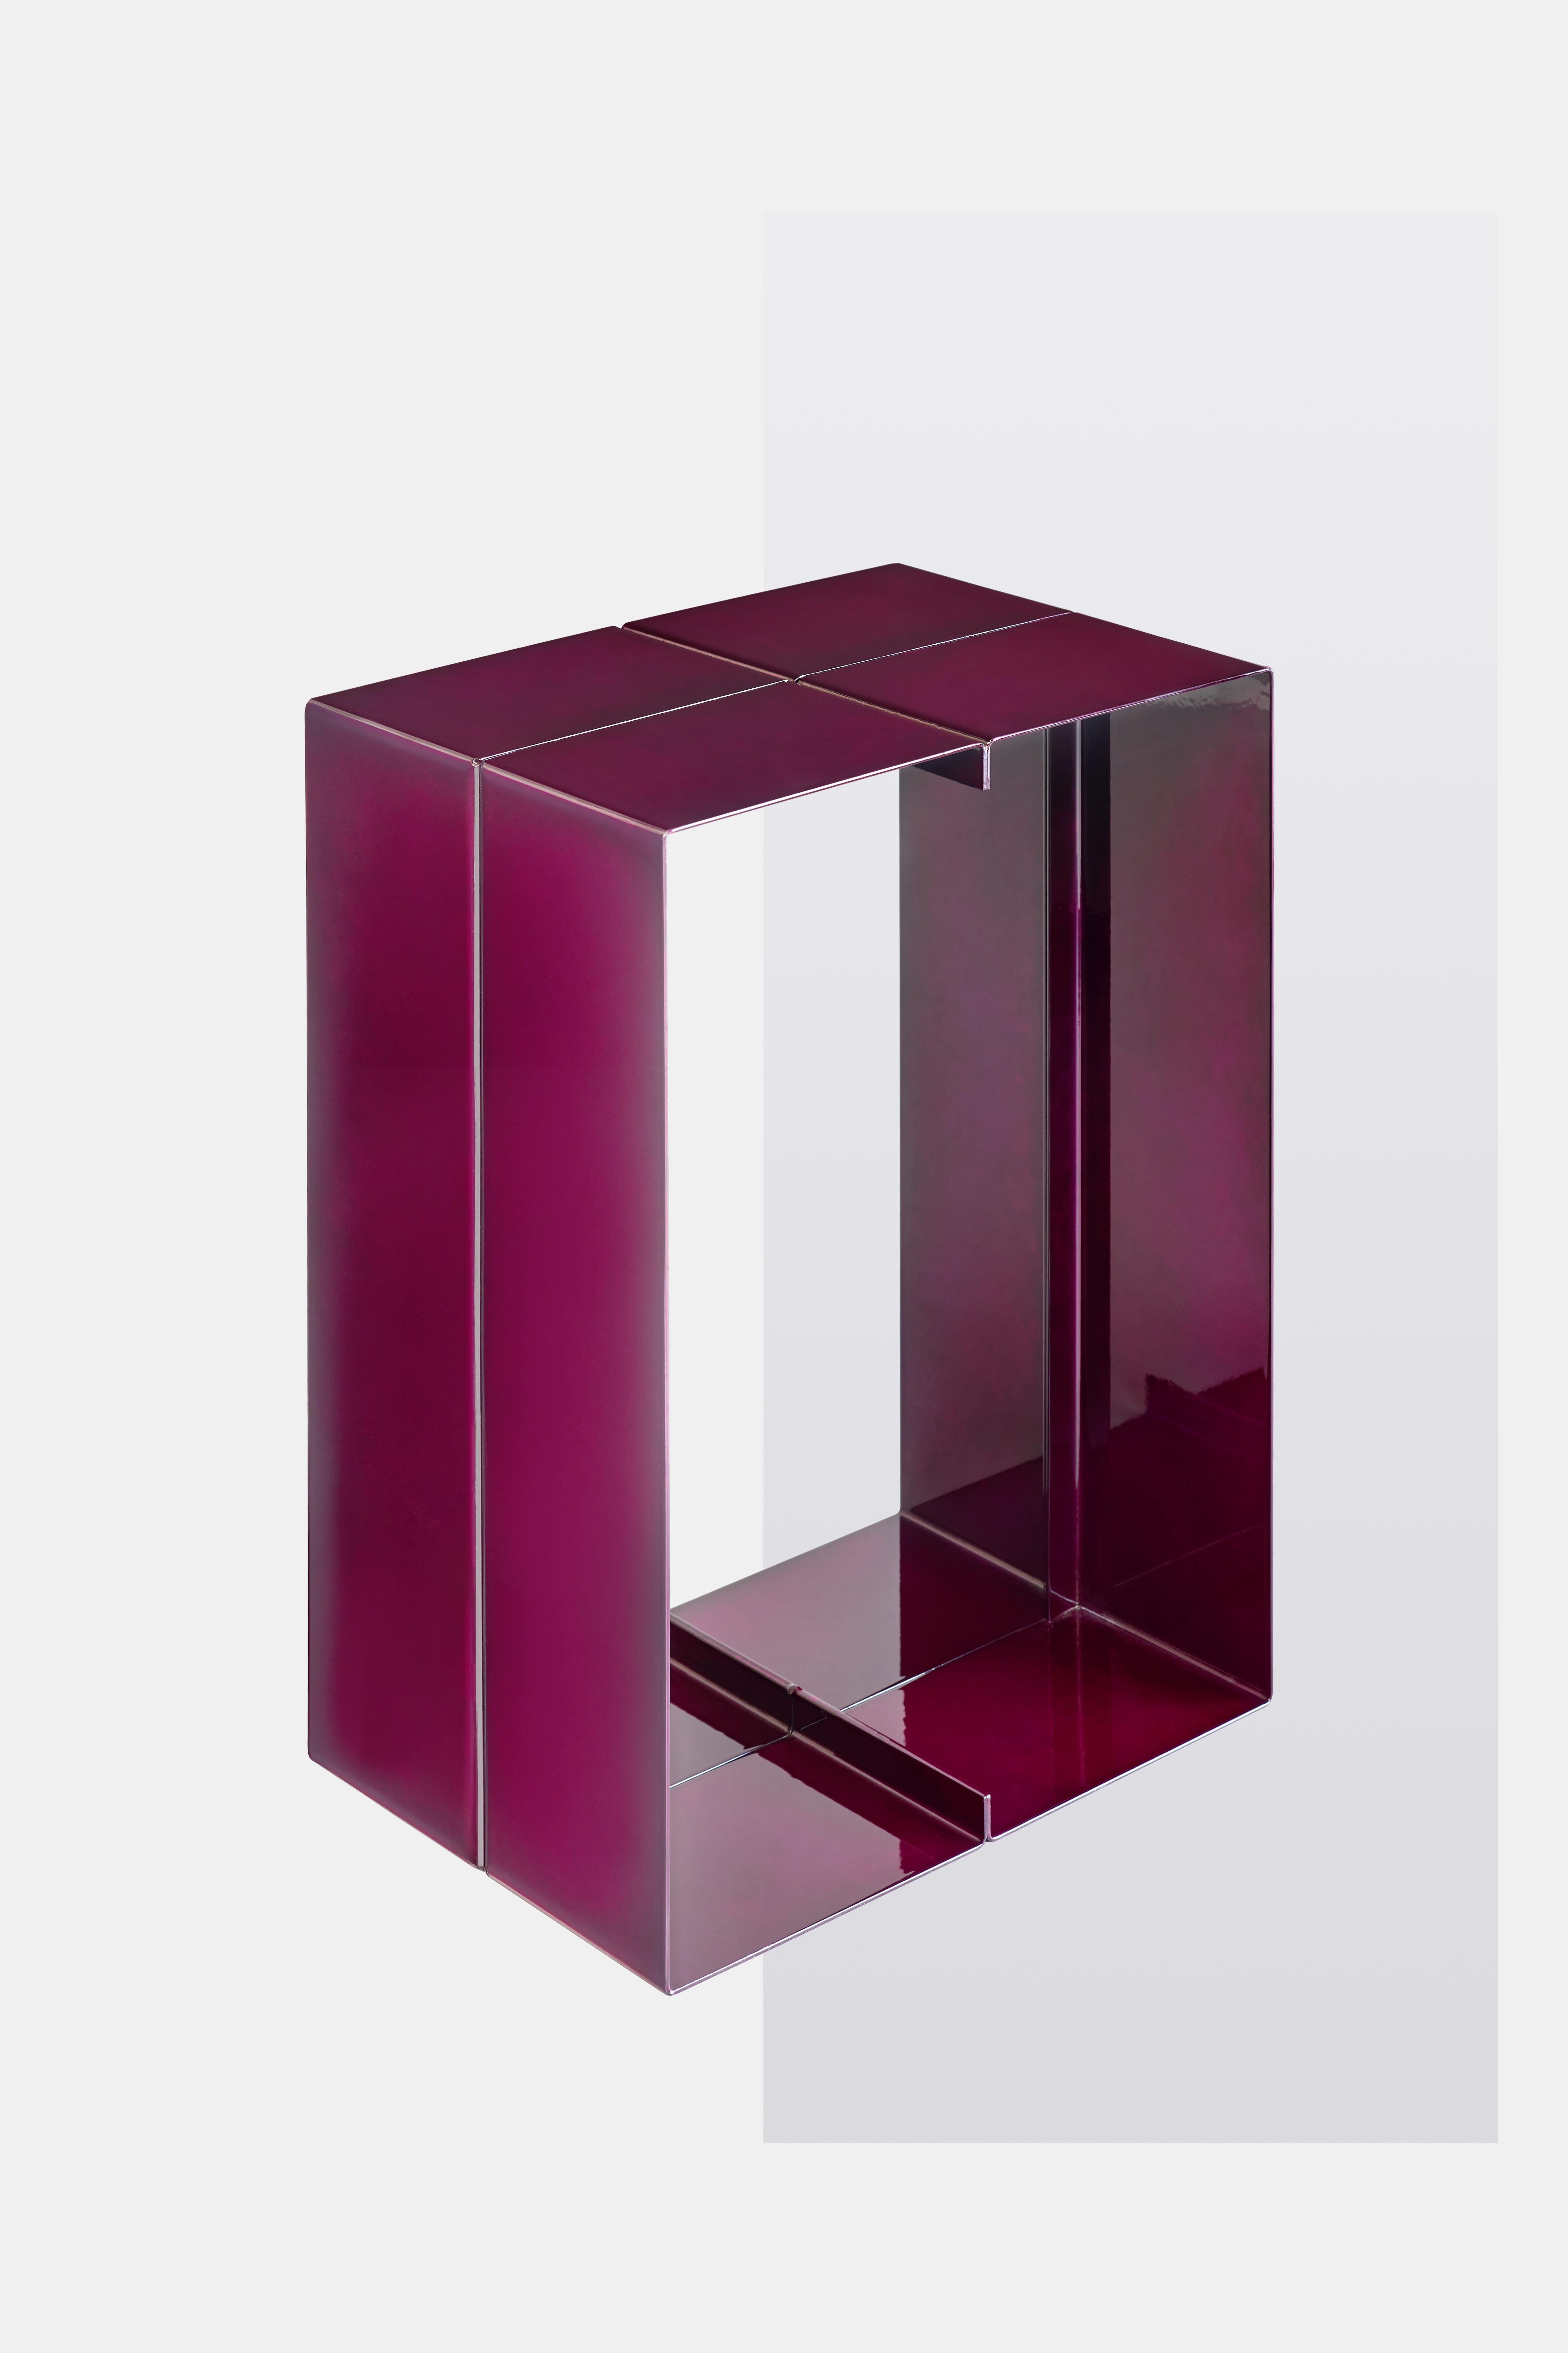 Material: folded sheet metal (steel)
Finishing: galvanised and powder coated

Based in Eindhoven, Luuk van den Broek is working in the field between art and industrial design. Intuitively looking for the deepest color, the most logical connection